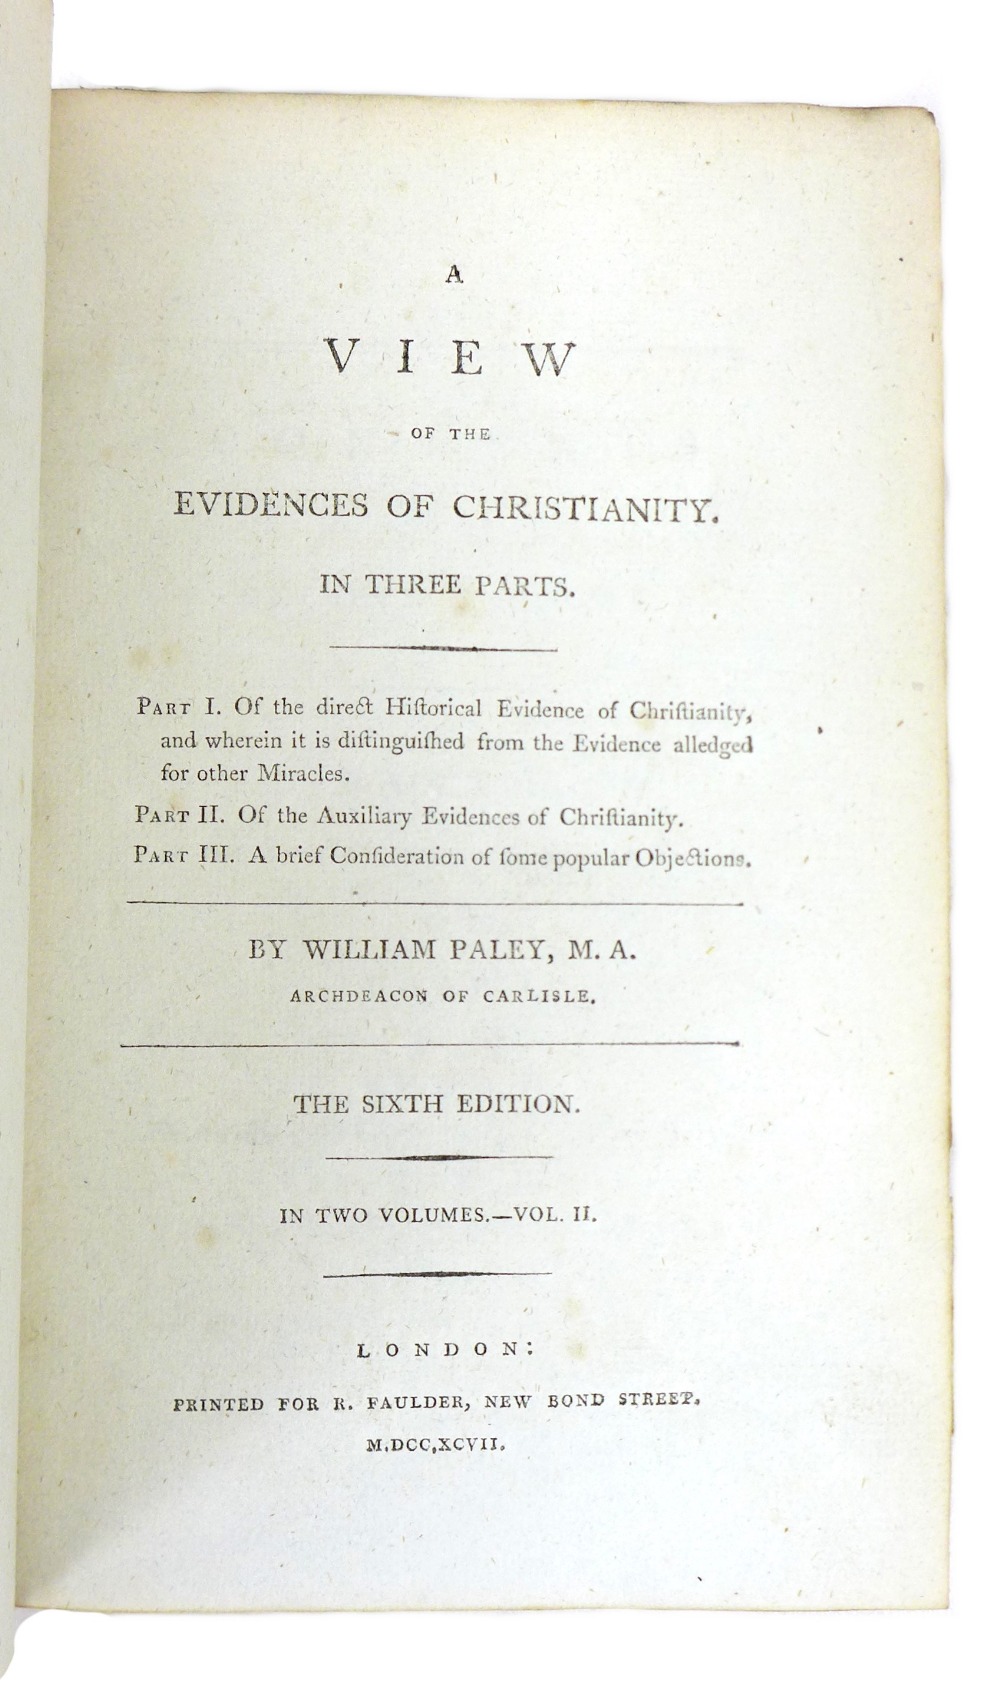 William Paley, Archdeacon of Carlisle: 'A View of the Evidences of Christianity, in Three Parts', in - Image 5 of 6